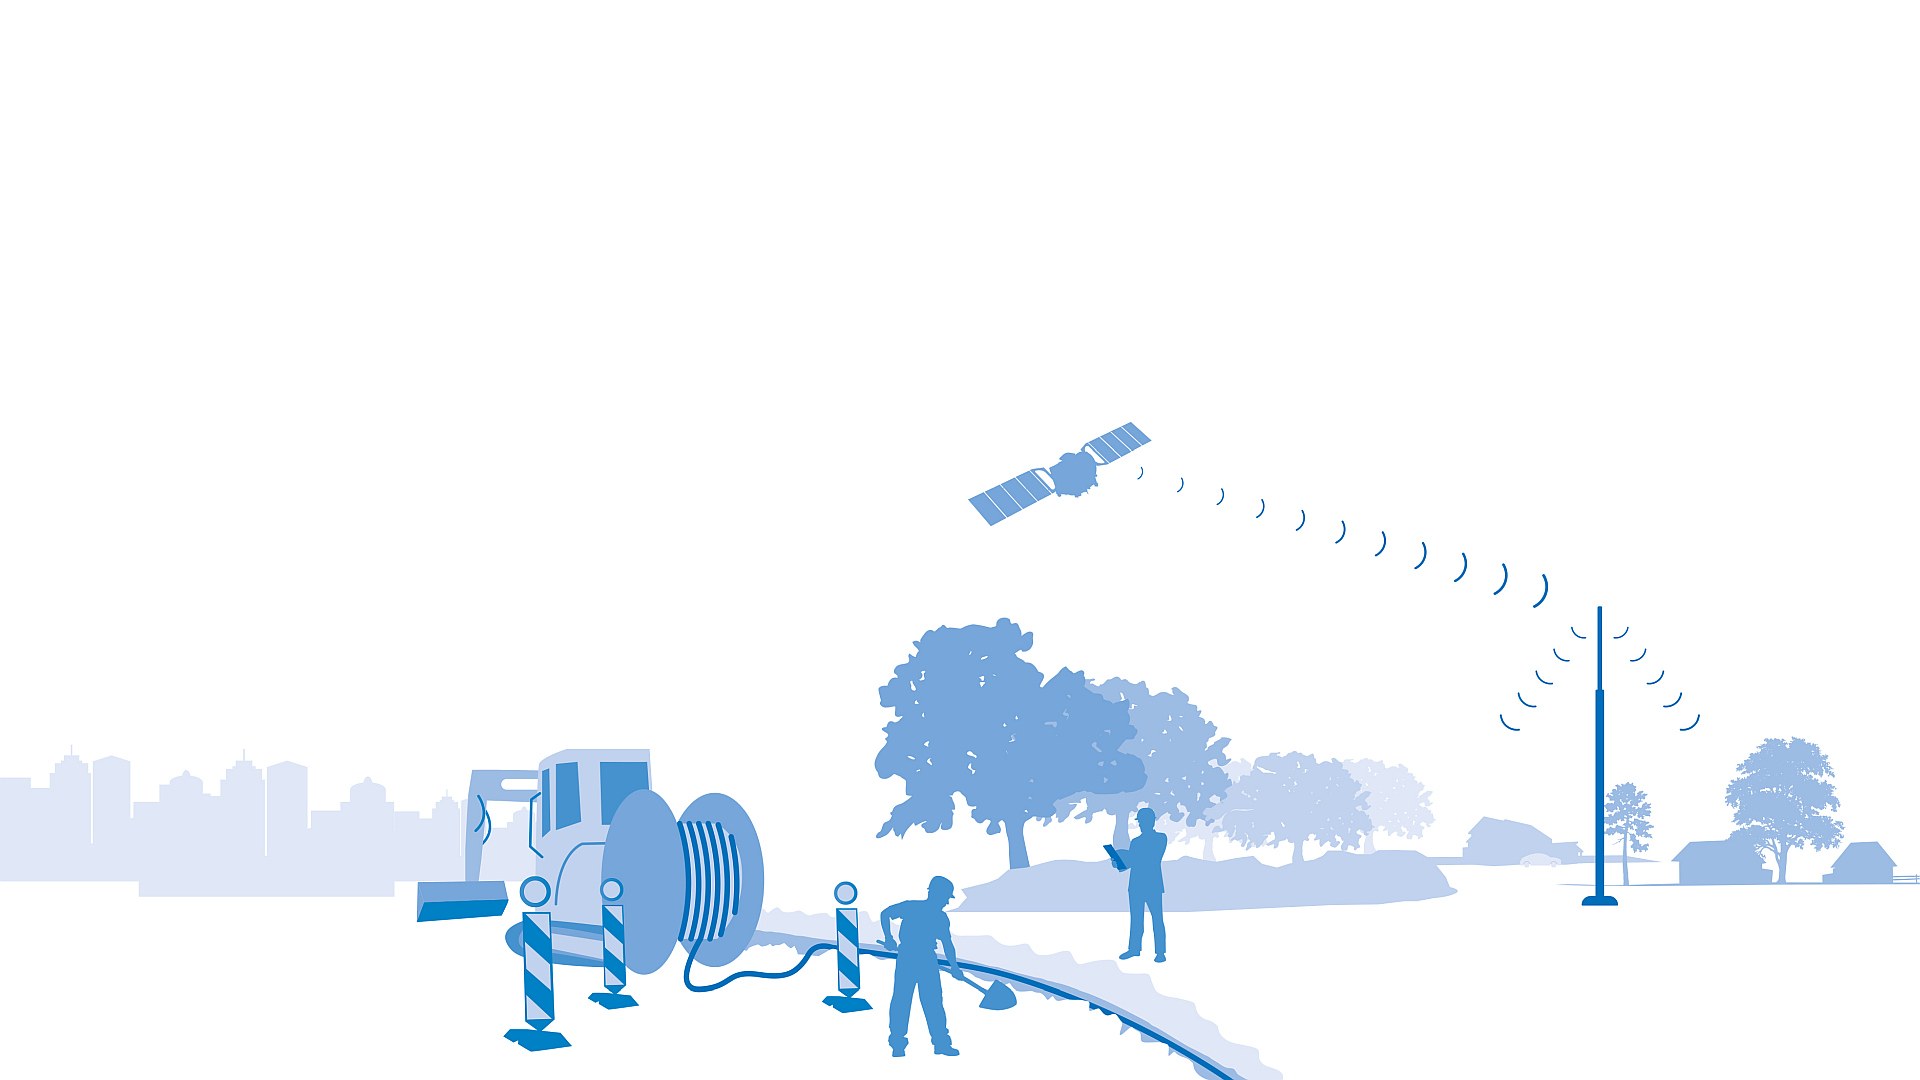 Satellites can support the expansion of broadband coverage